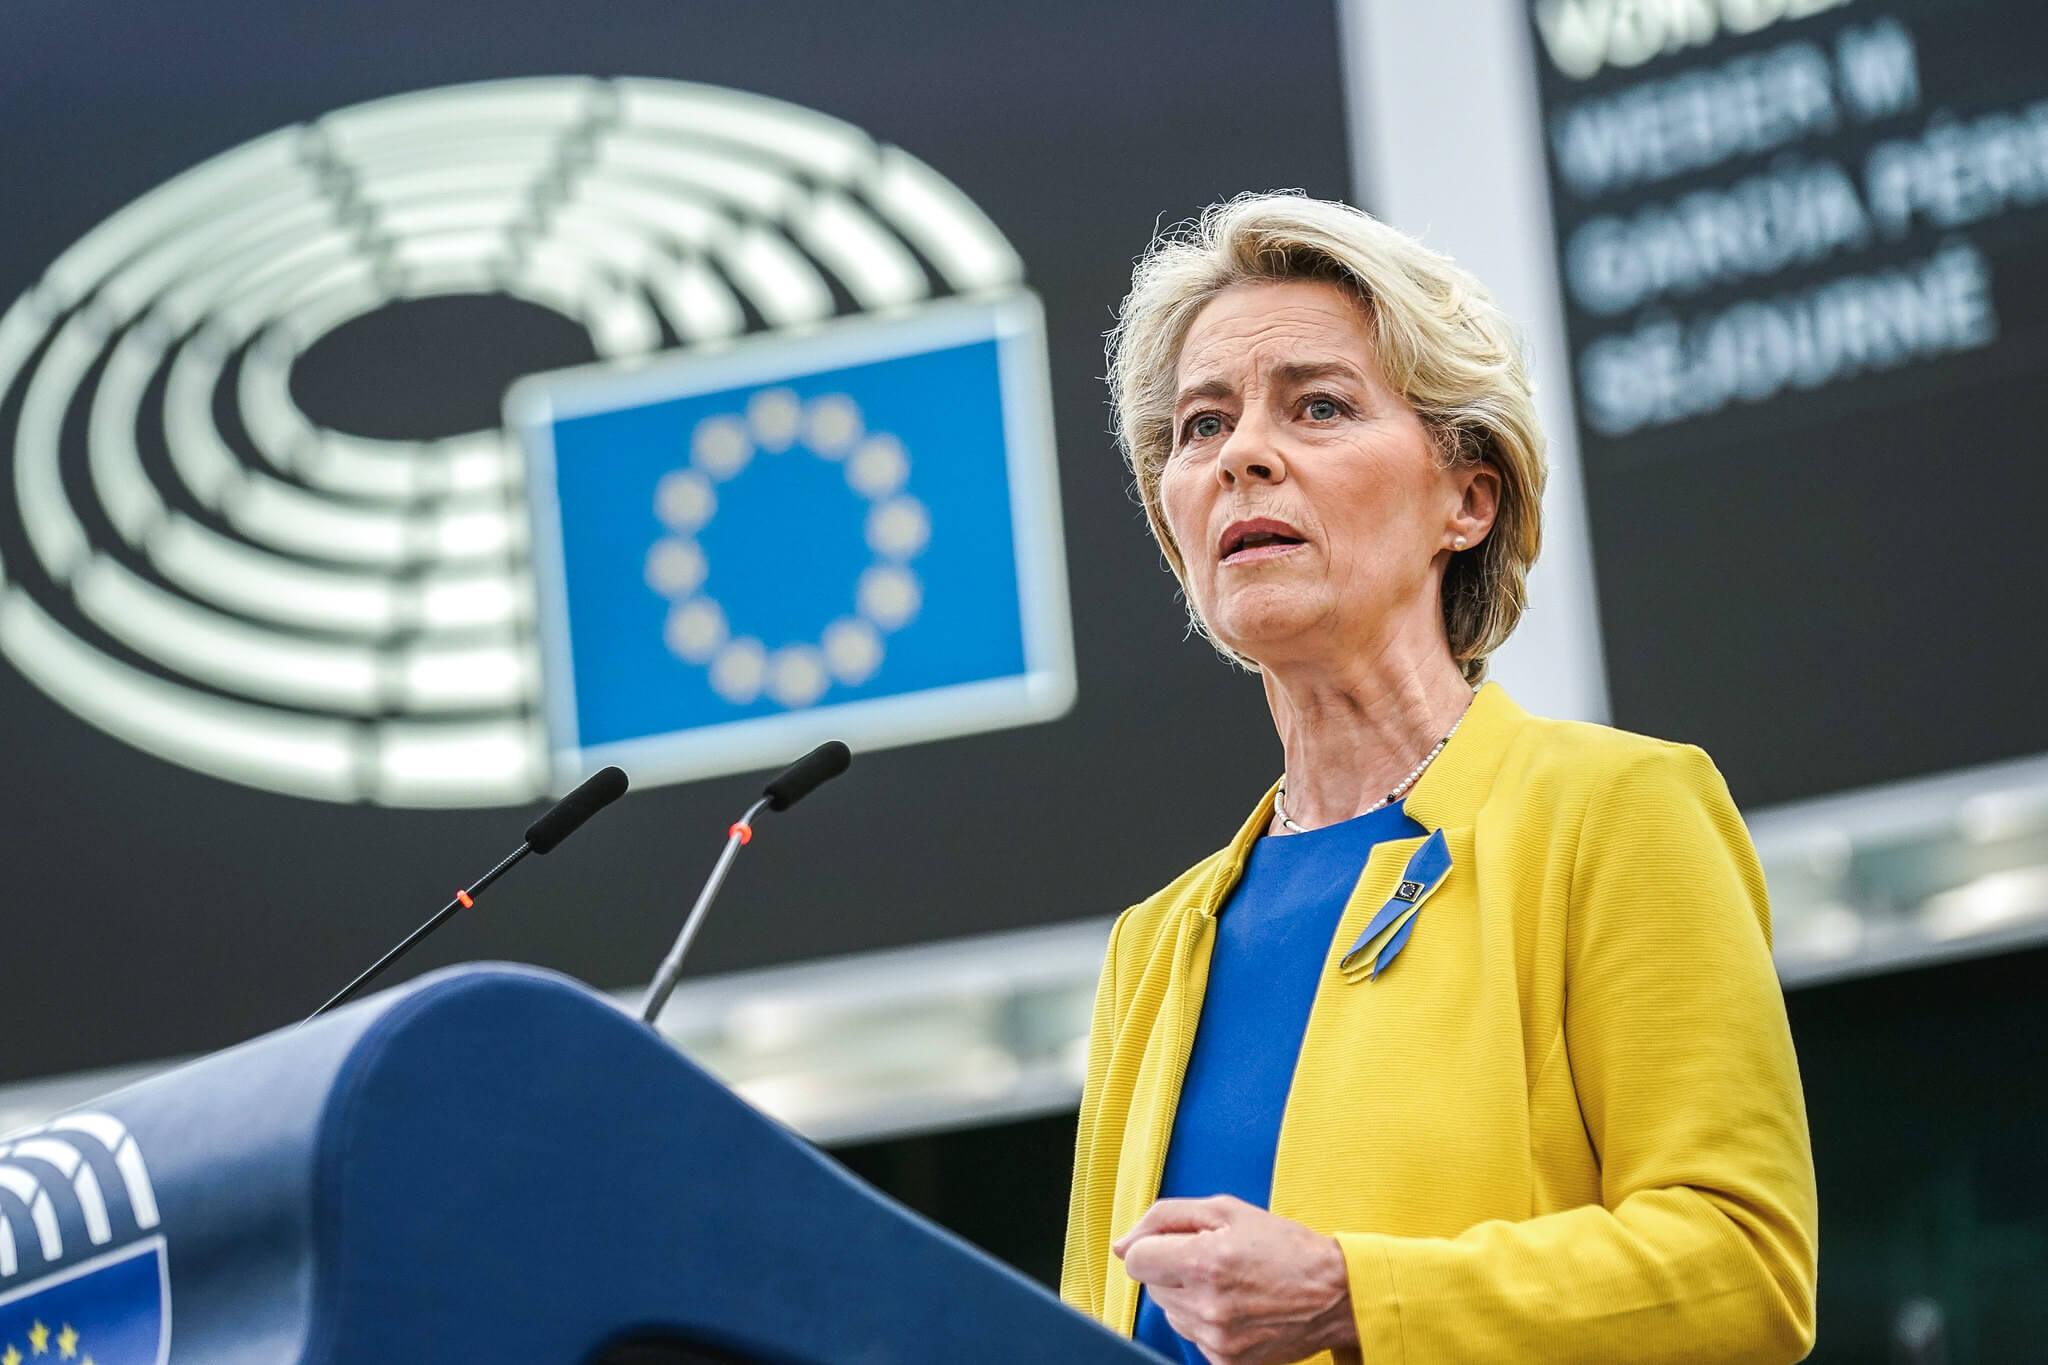 Guerot - State of the Union address delivered by the President of the European Commission Ursula von der Leyen on 14 September 2022 in Strasbourg. European Parliament